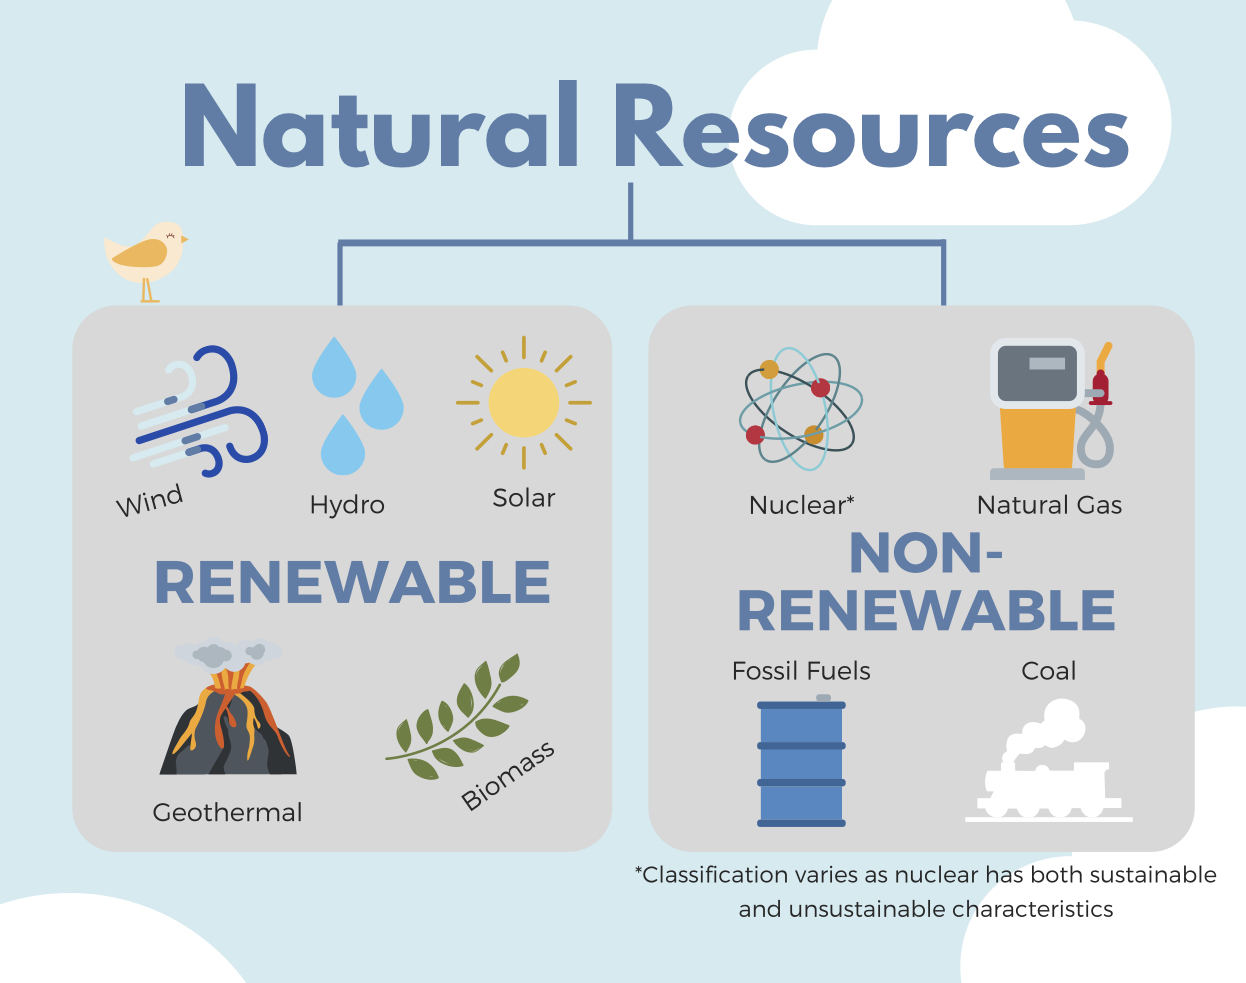 Natural Resources can be Renewable or Non-Renewable